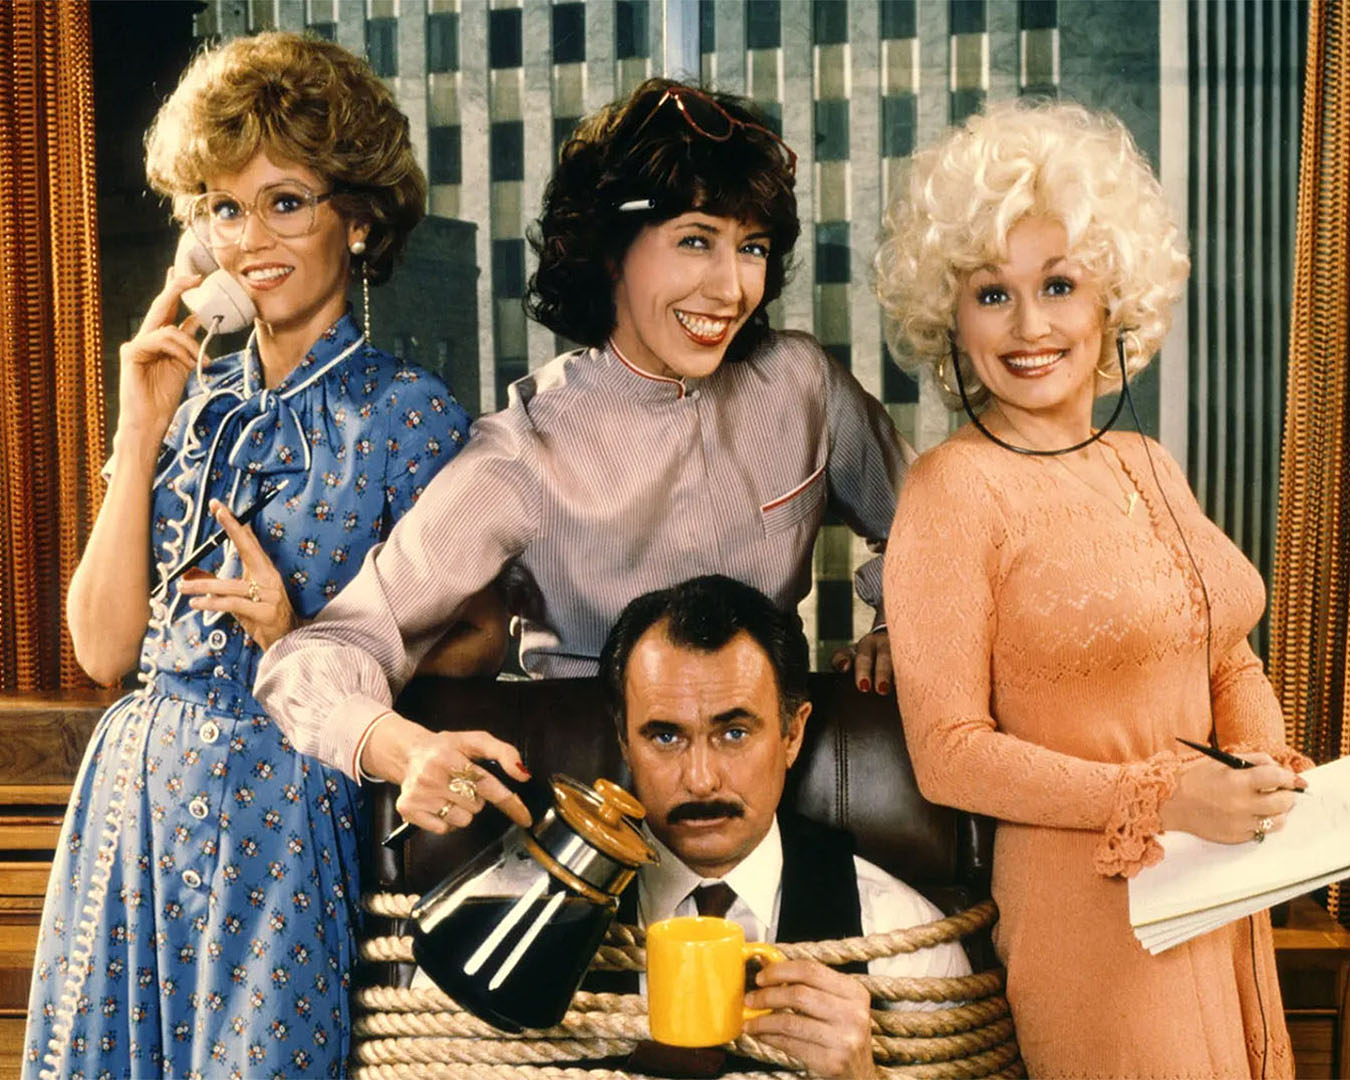 The original cast from 9 to 5.